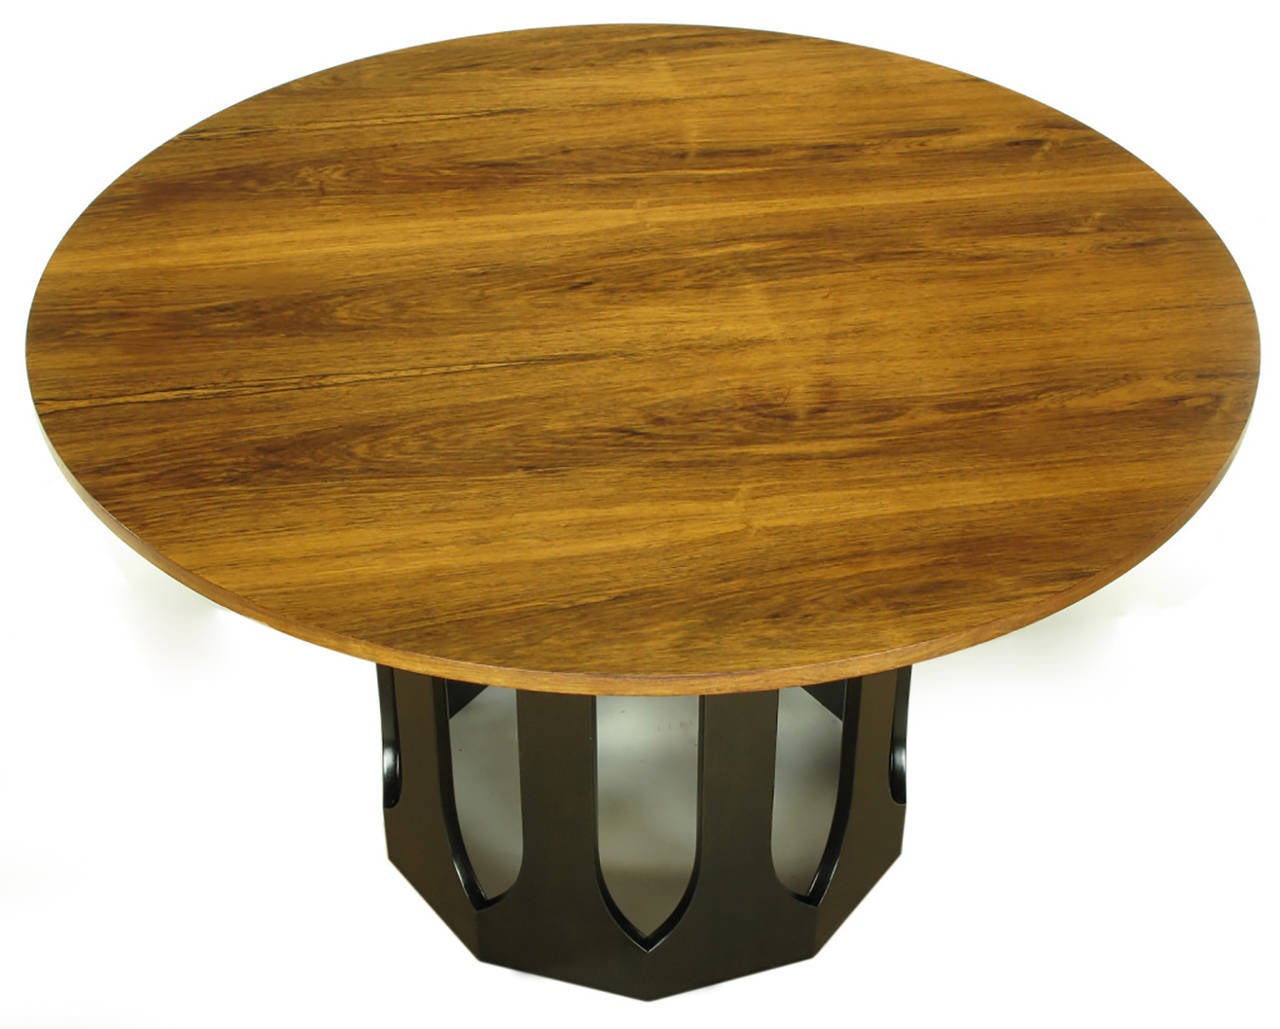 Harvey Probber round game table with an open decagon Moorish style dark chocolate lacquered base and beautifully grained rosewood top. This would also make an excellent center table.
Overhang from edge to center is 10.5